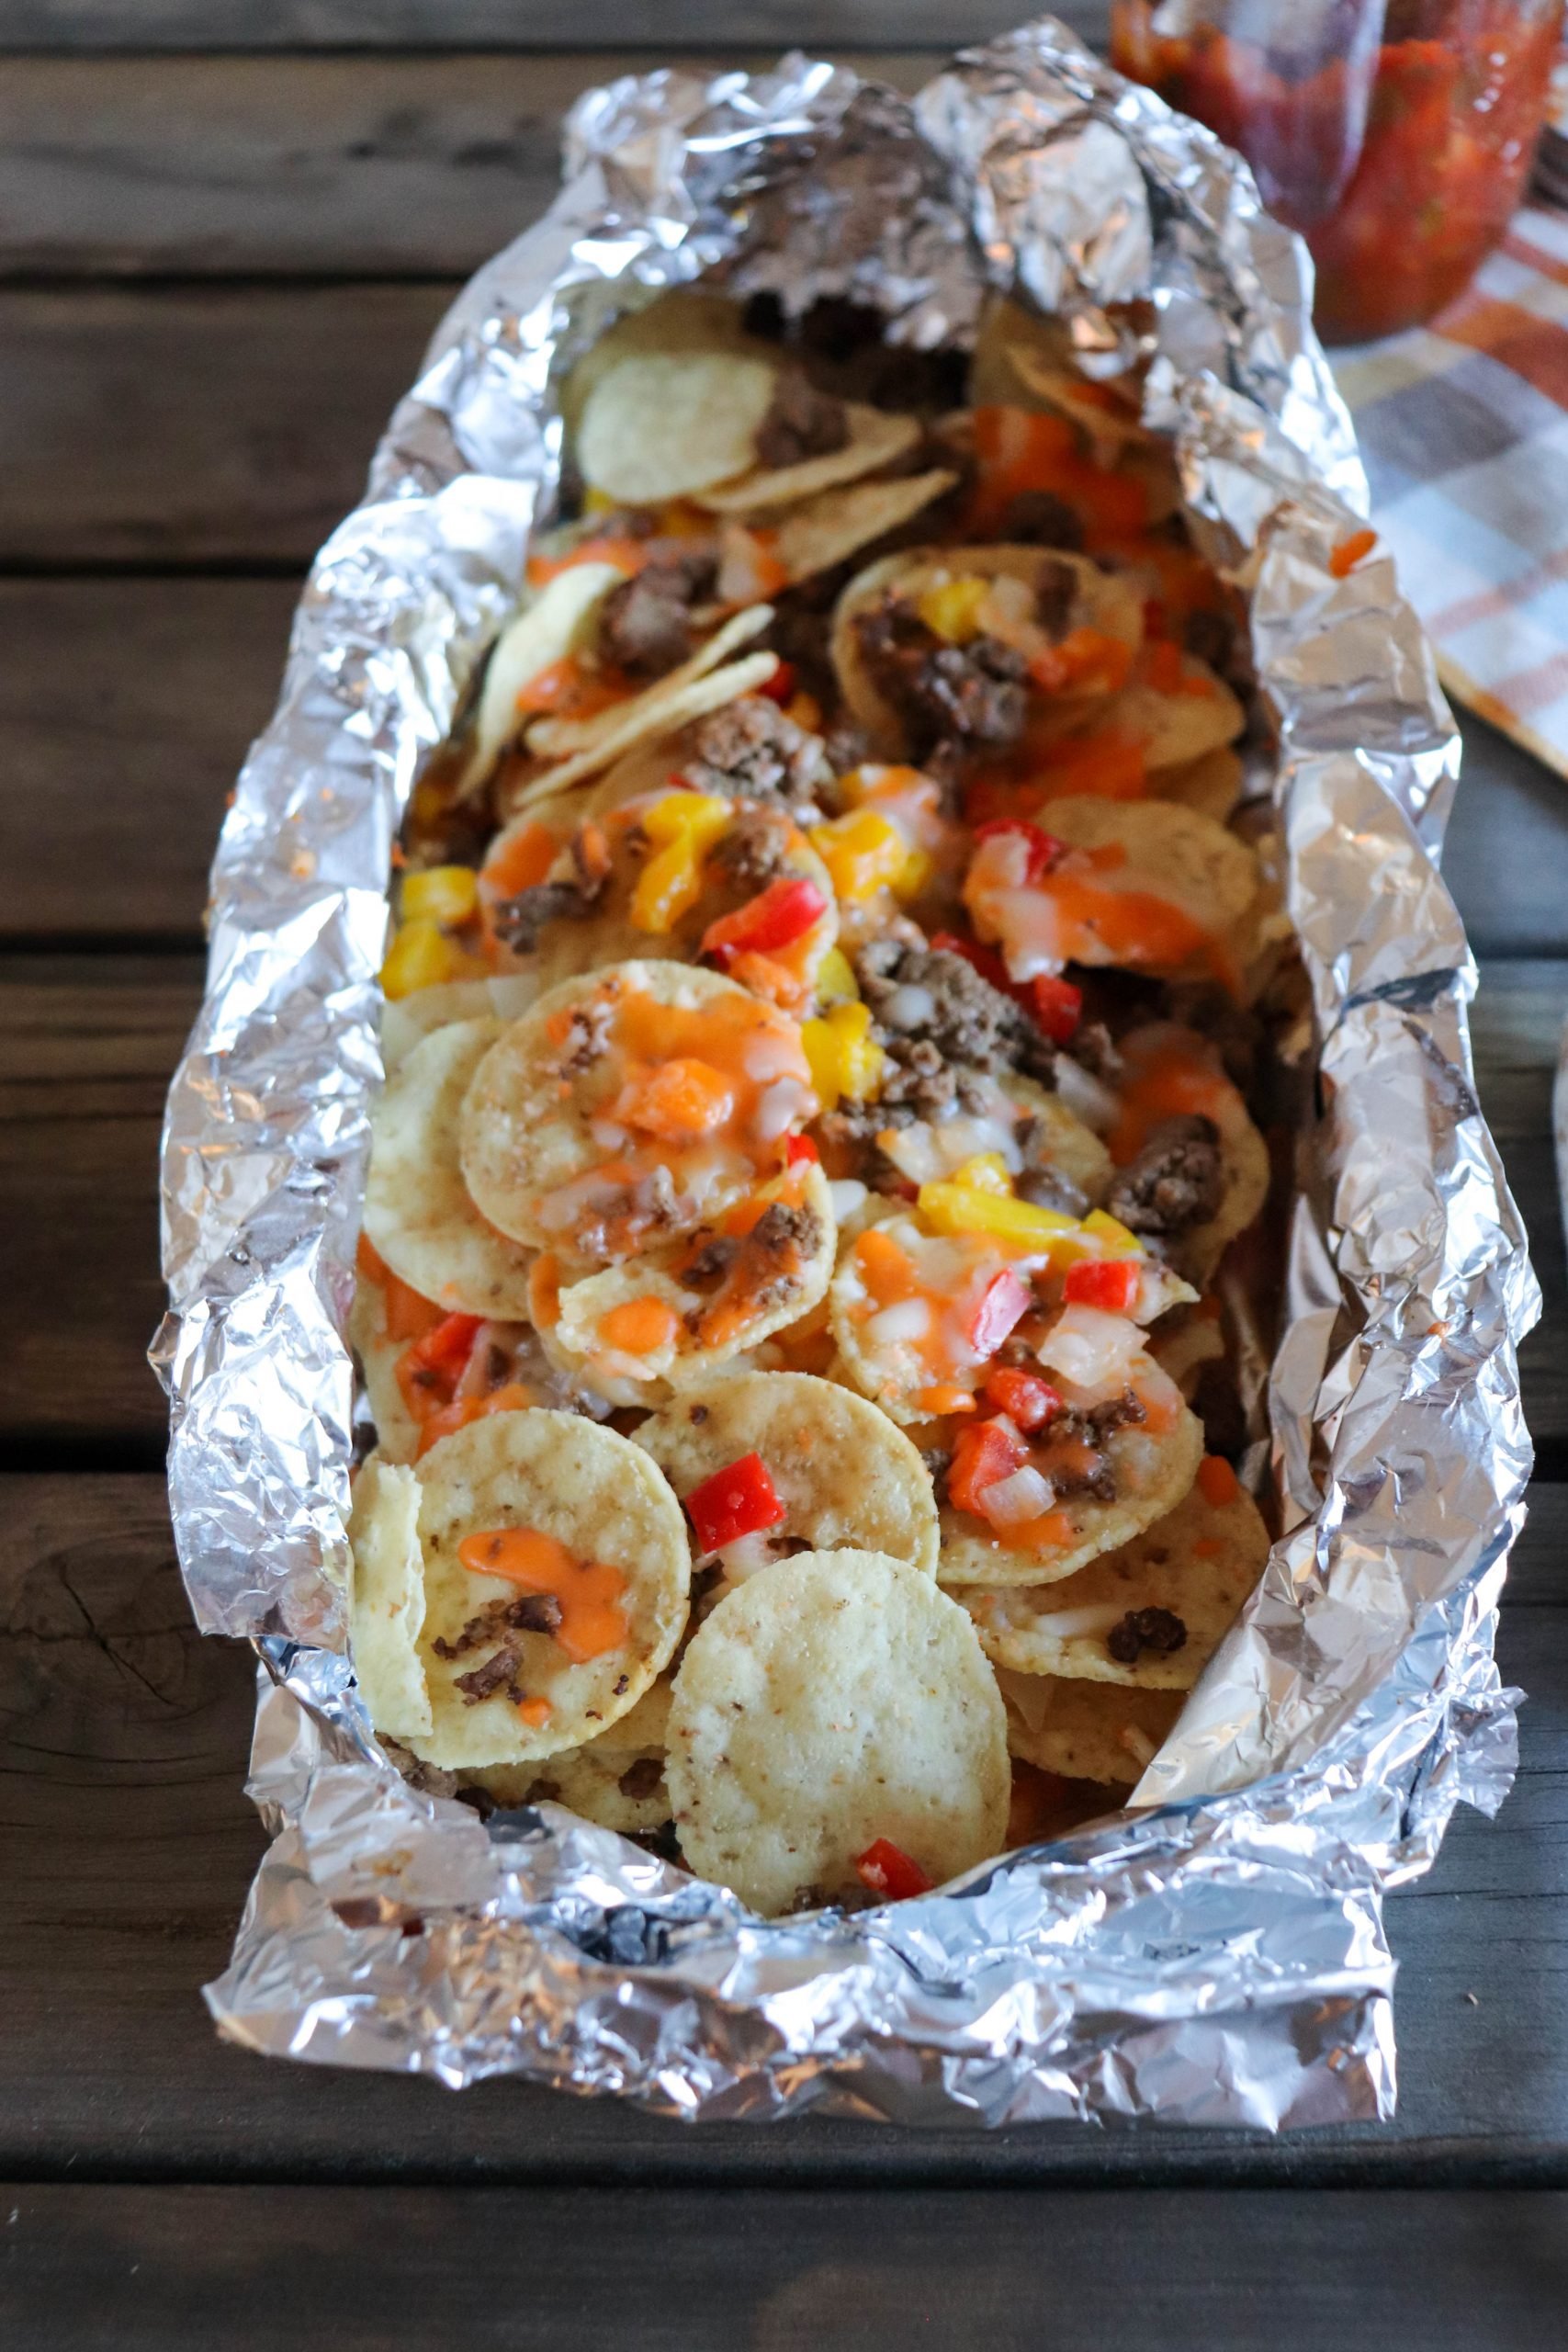 https://campfirefoodie.com/wp-content/uploads/2021/02/Foil-Packet-Nacho-Recipe-8-scaled.jpg